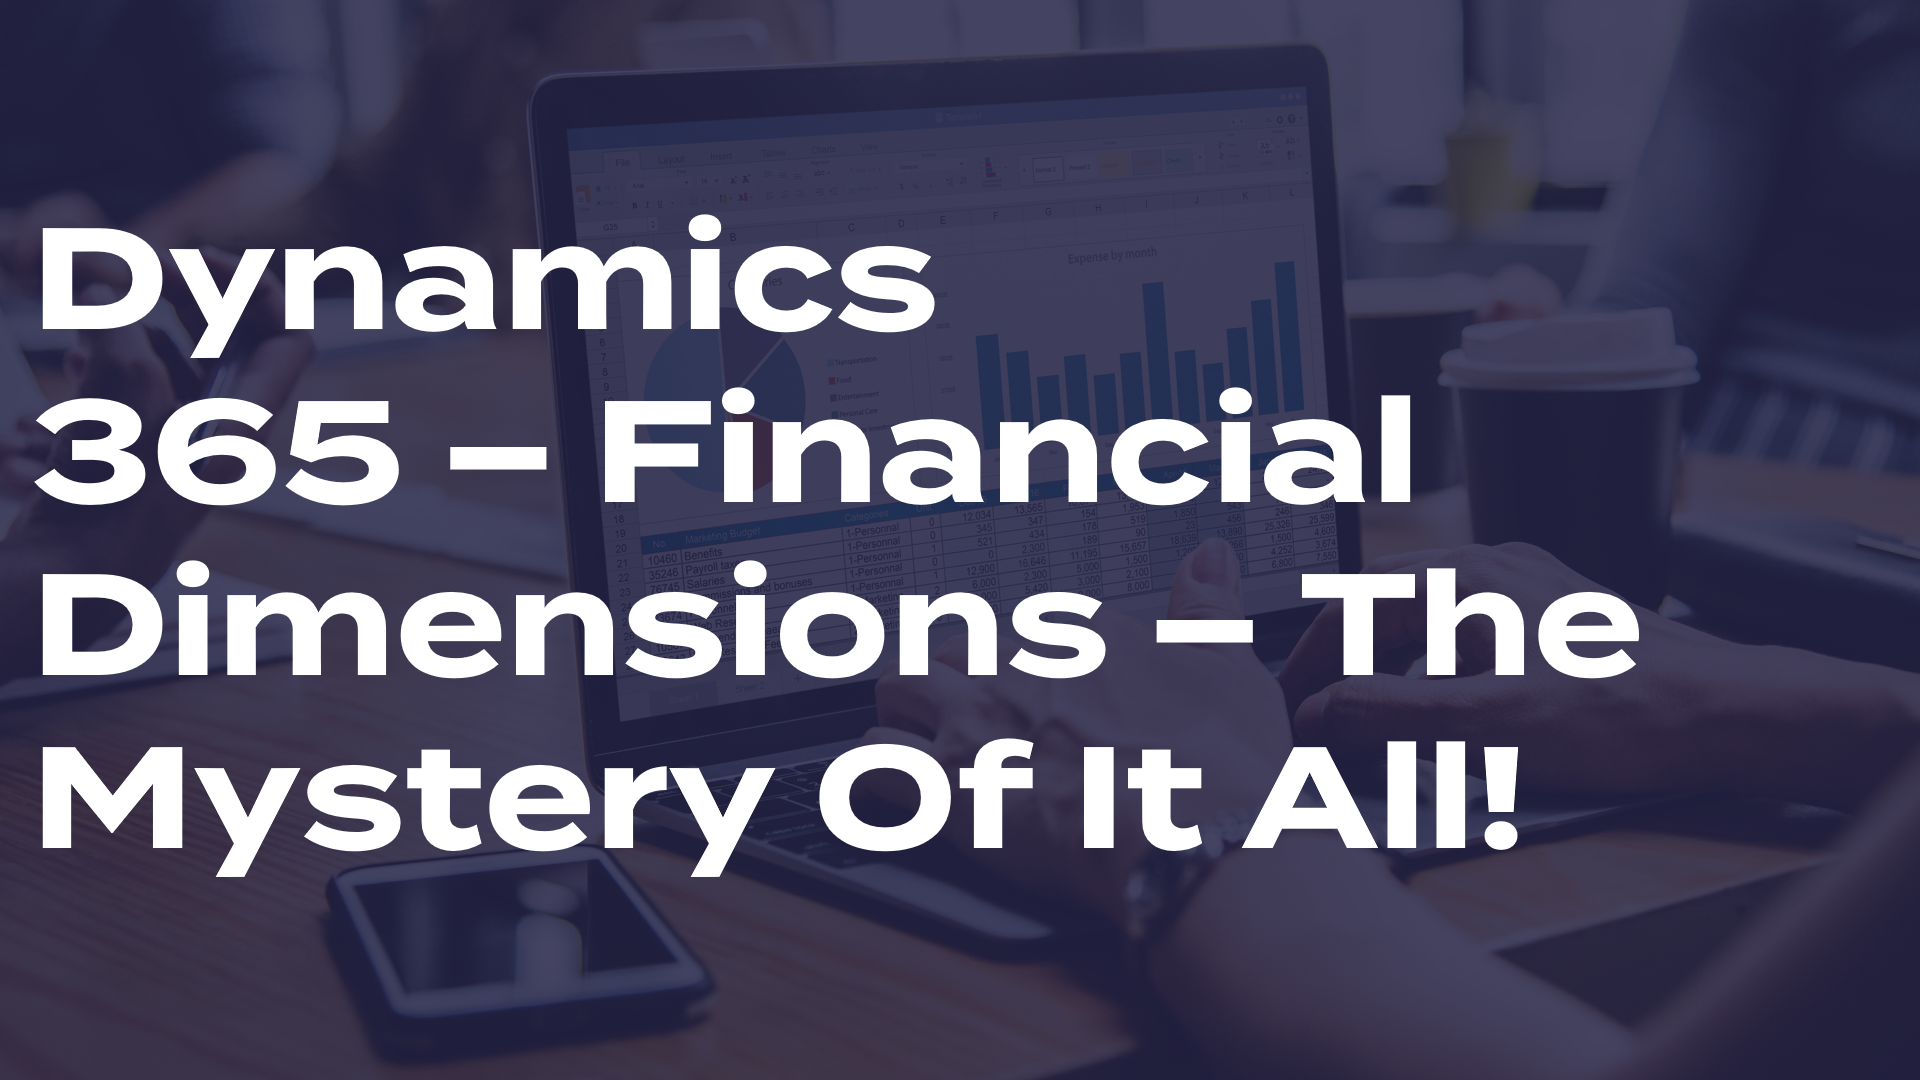 dynamics-365-financial-dimensions-the-mystery-of-it-all-ellipse